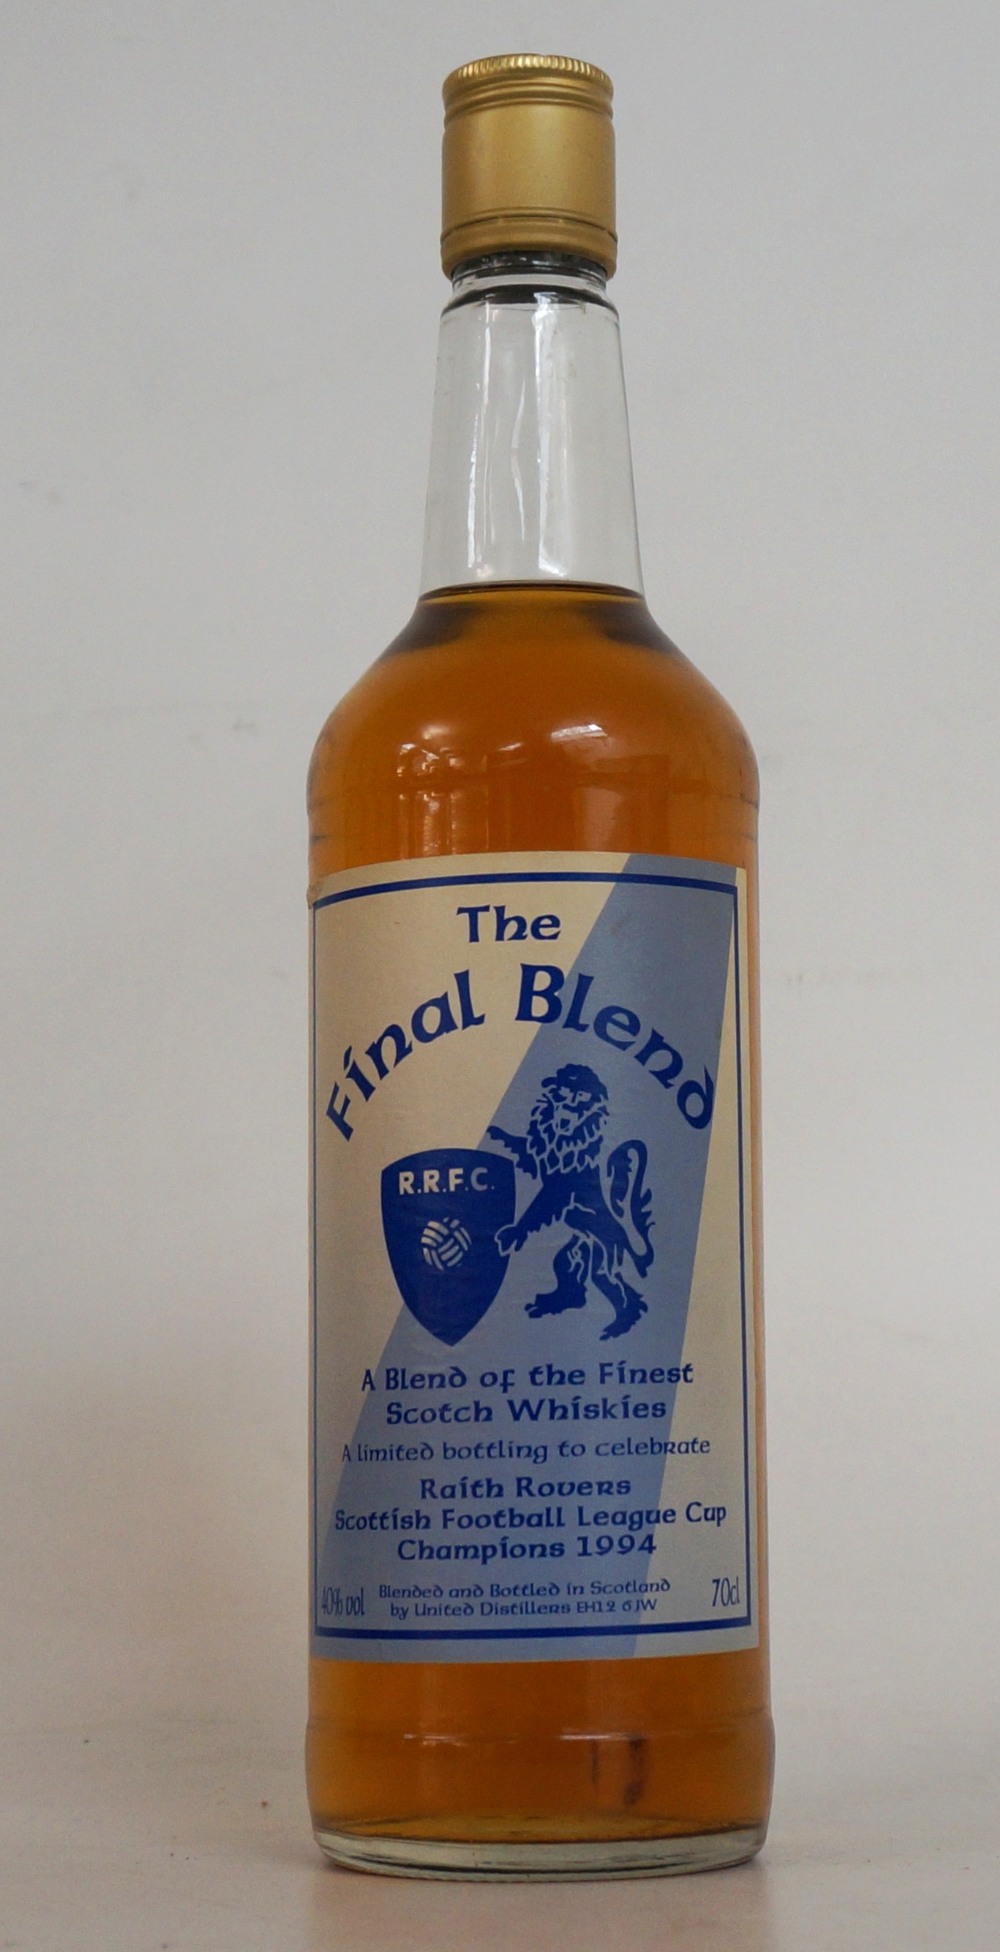 THE FINAL BLEND - RAITH ROVERS
1 bottle.  The Final Blend.  Blended Scotch Whisky.  70cl.  40% abv.